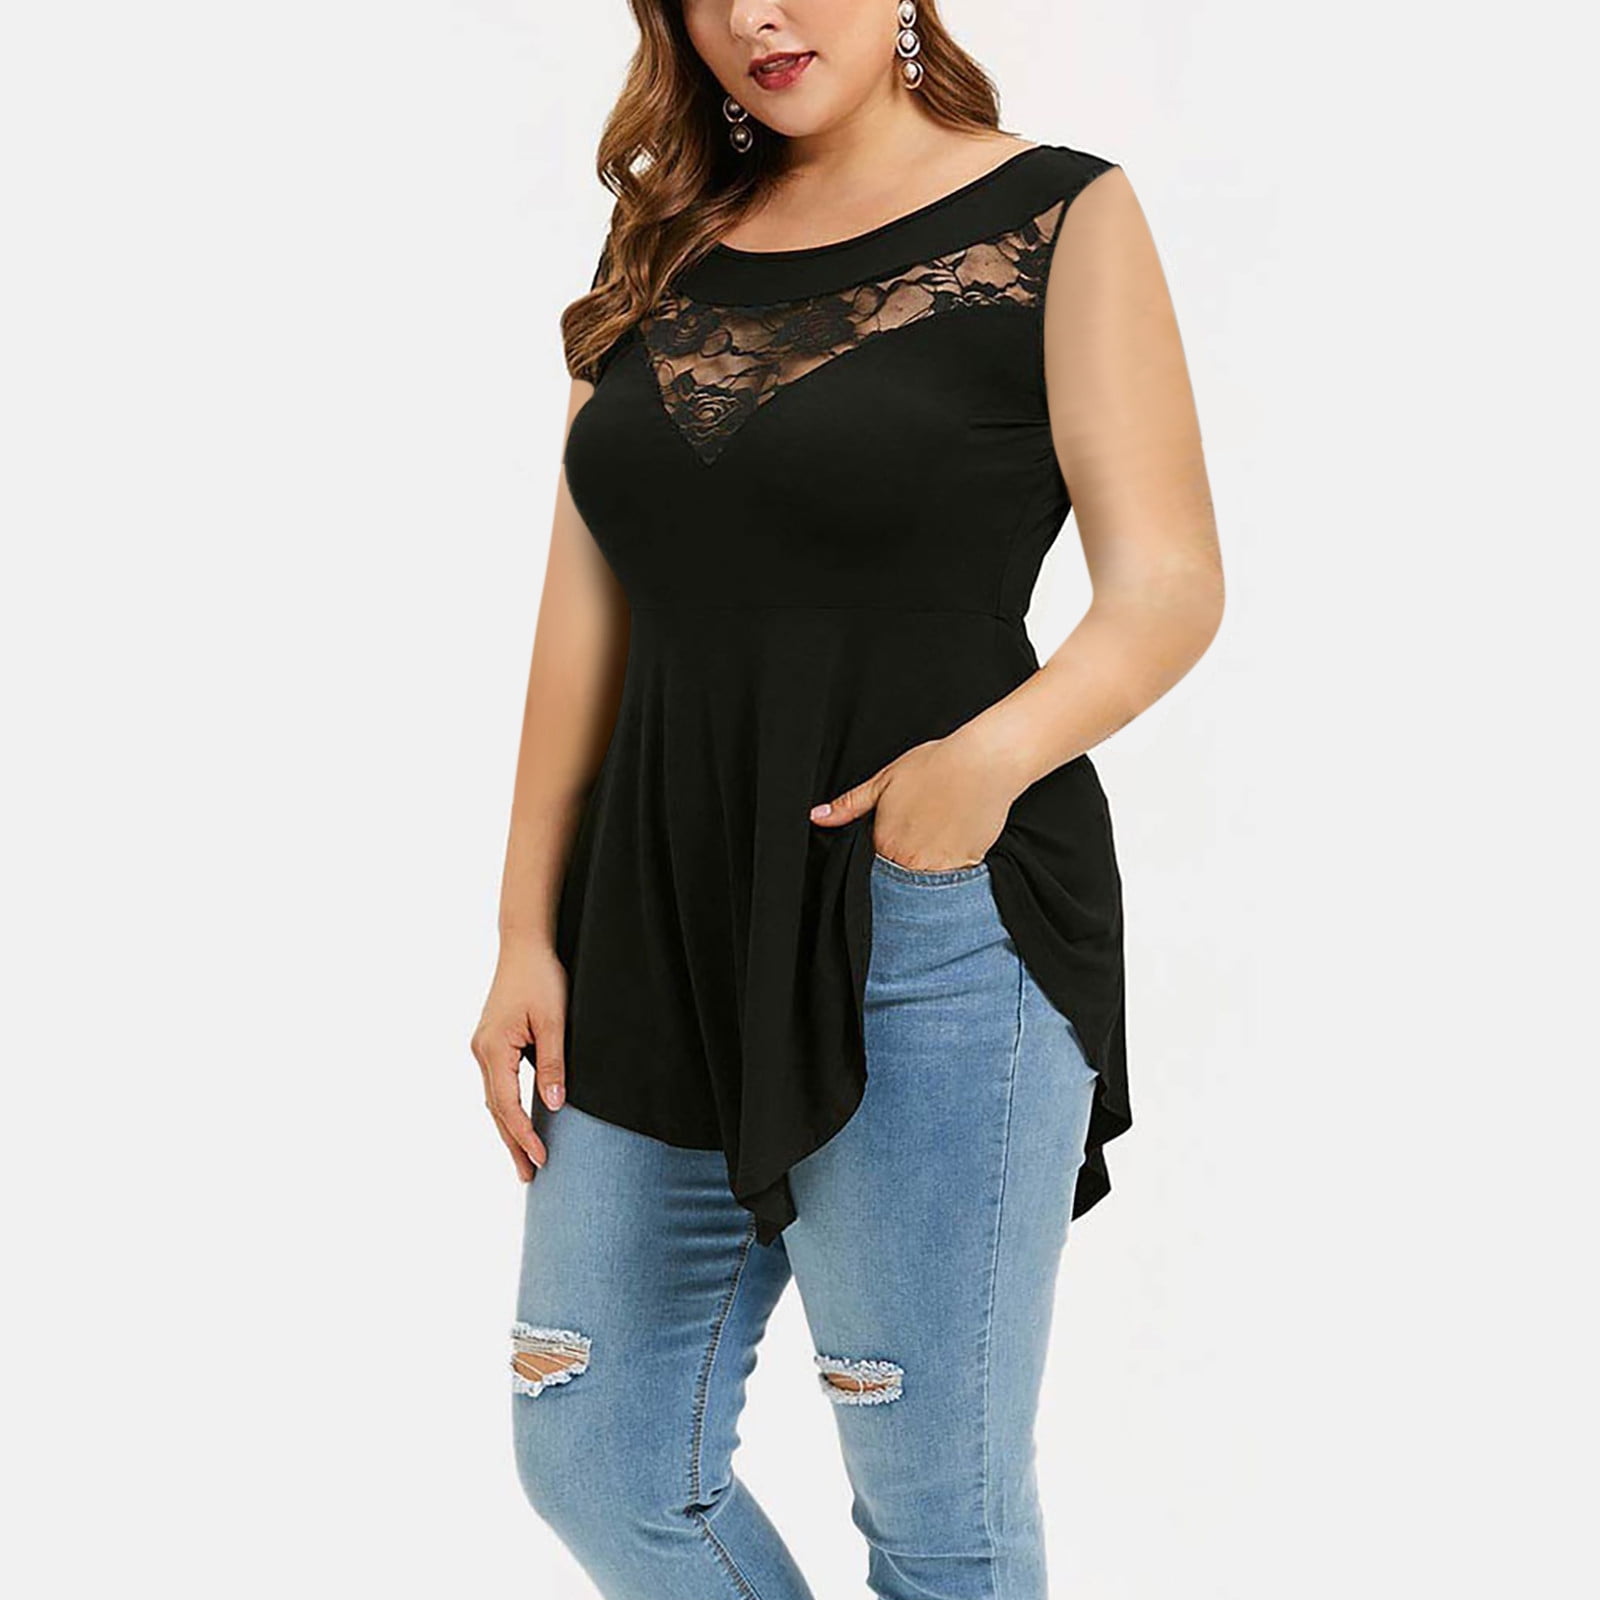 Aloohaidyvio Terra and Sky,Plus Size Women Blouse Solid Floral Lace ...